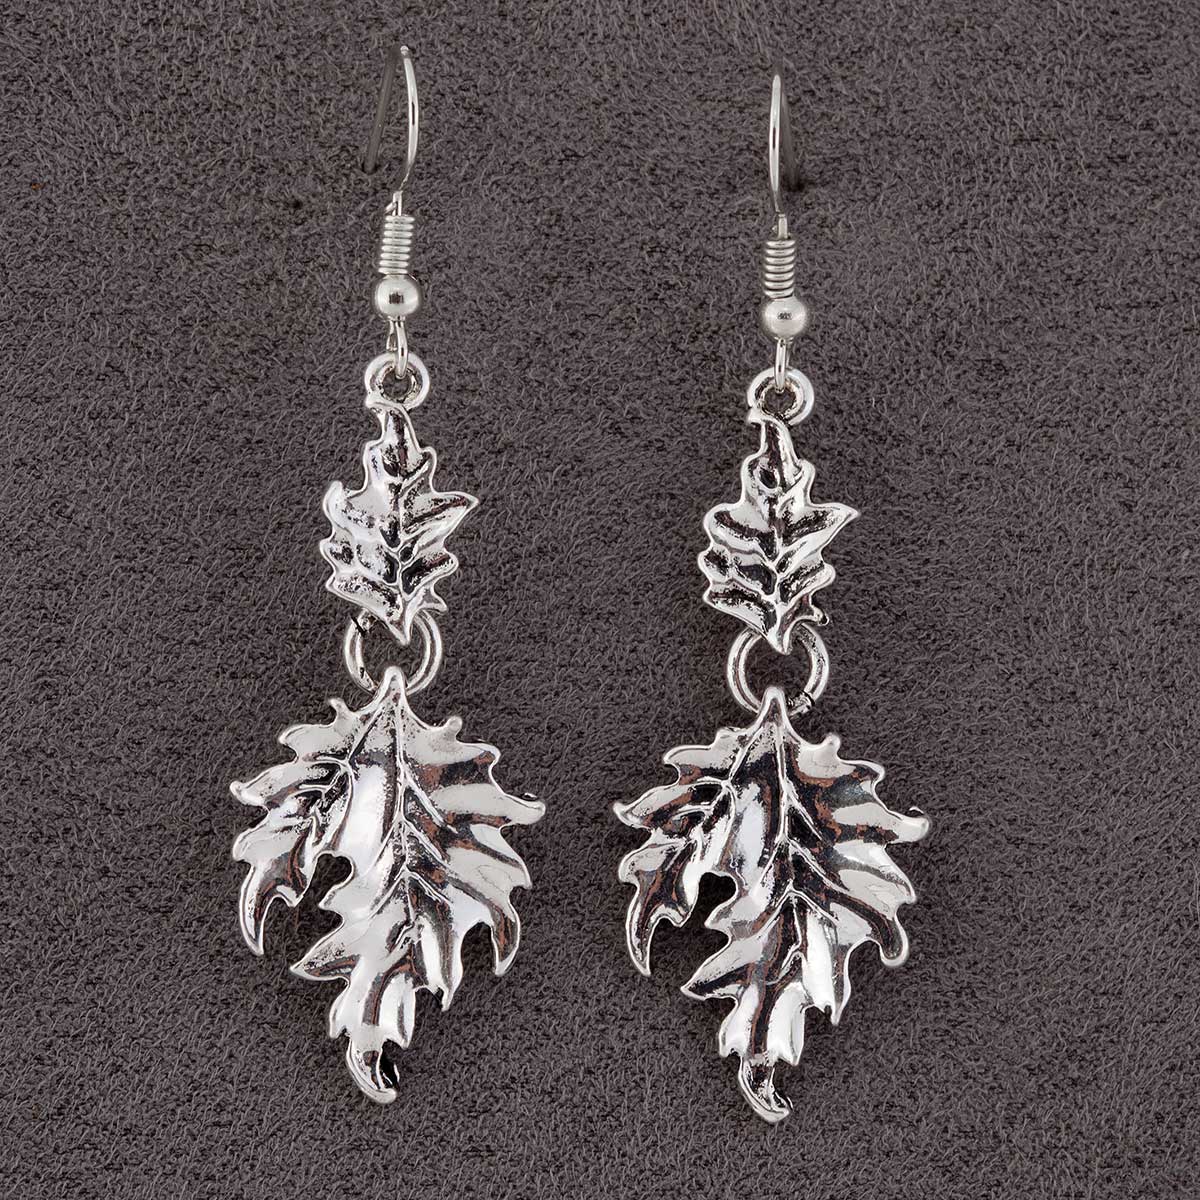 Silver1.5x.75" Acanthus Double Leaf on French Wire Earrings 70sp